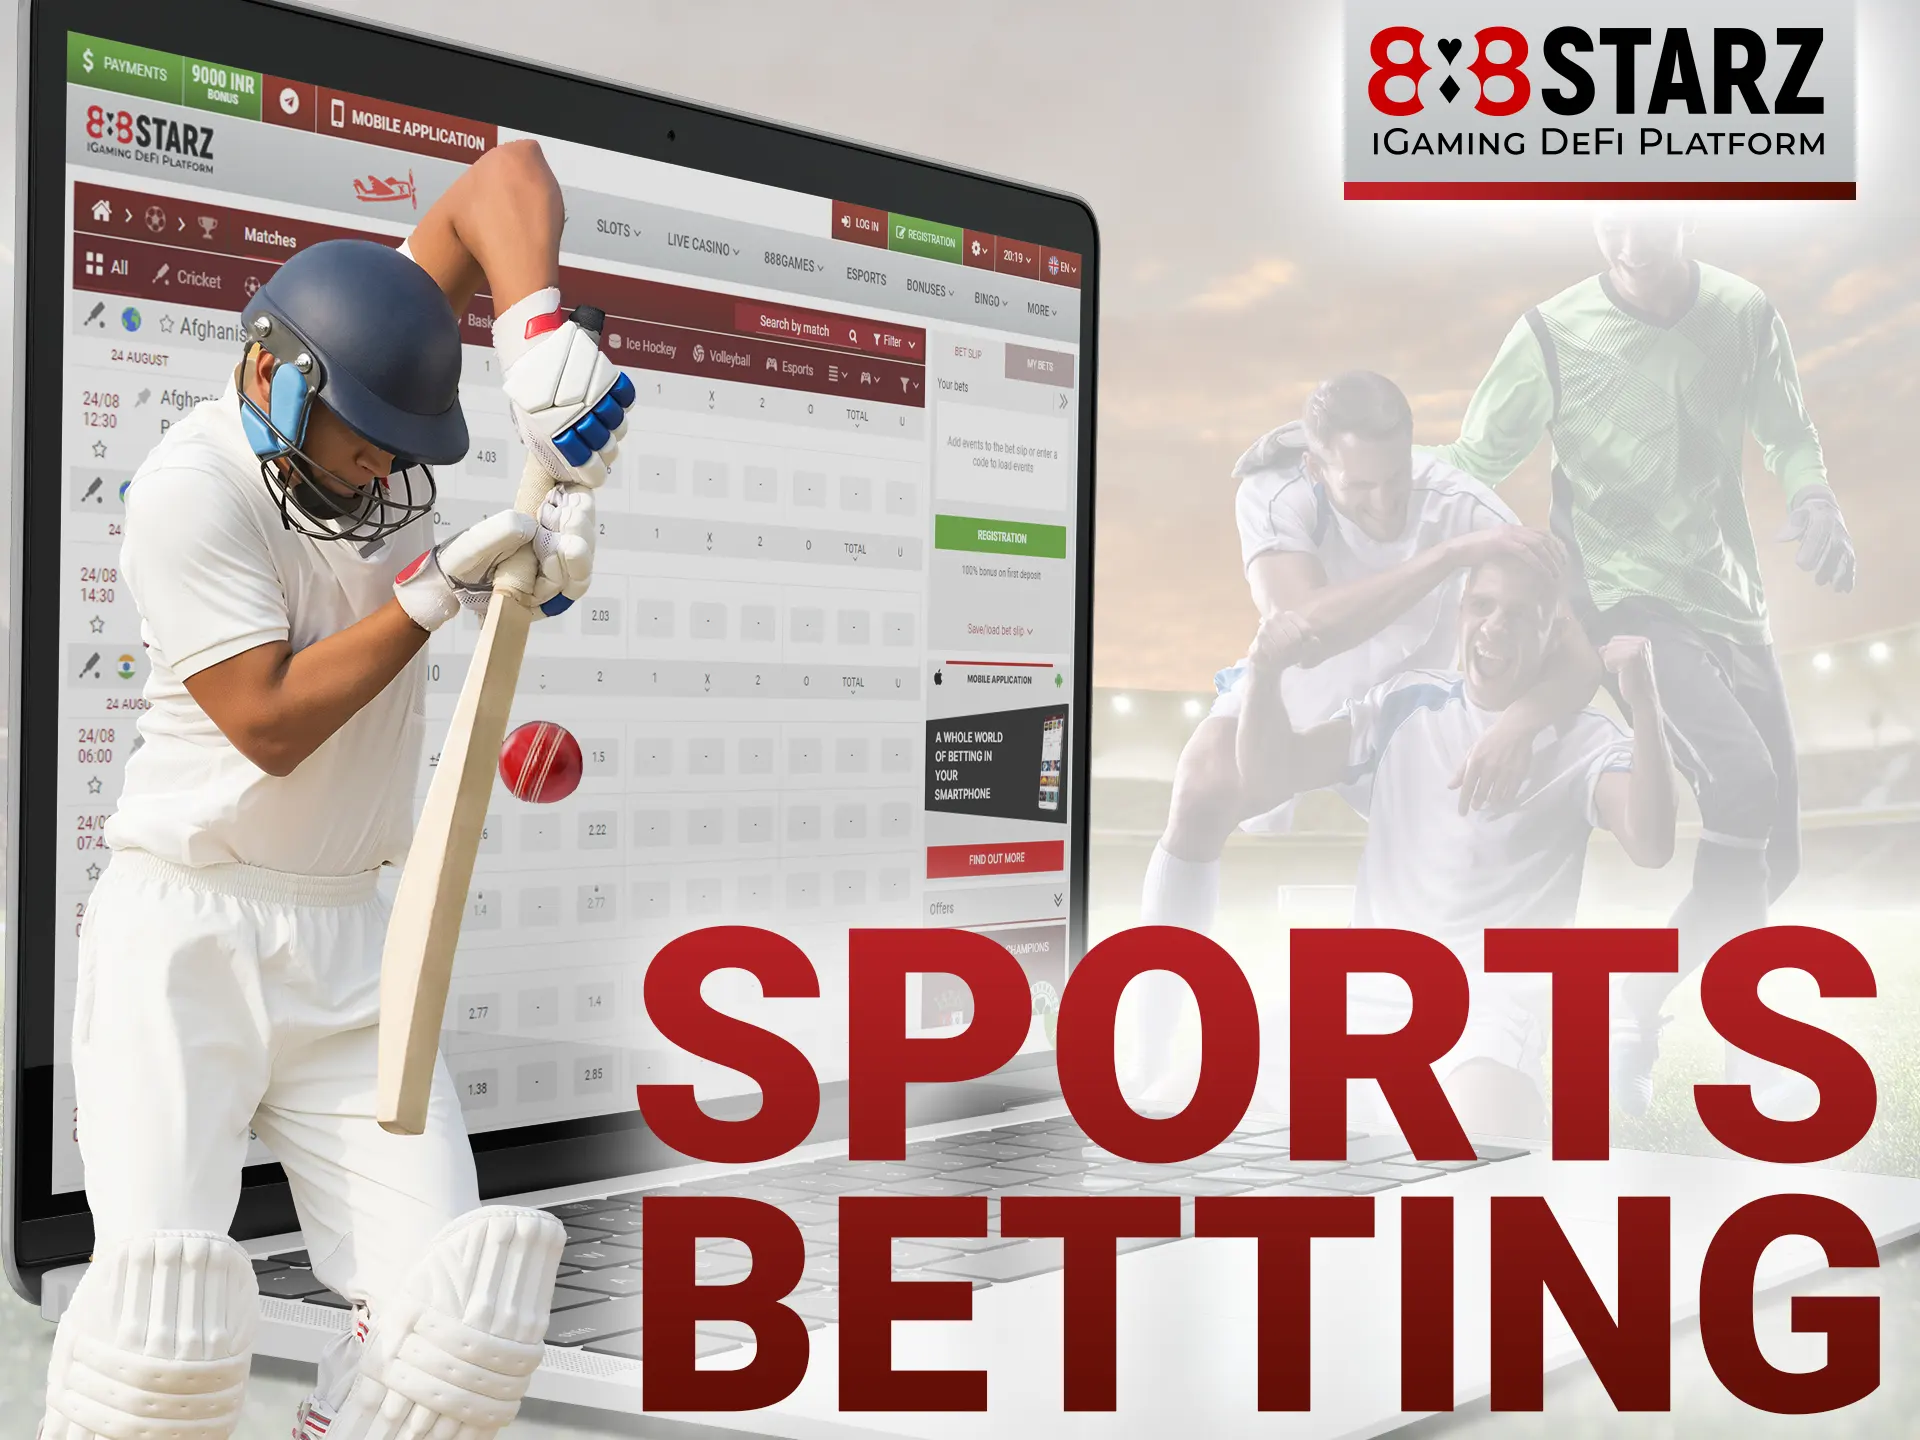 At 888starz, sports betting enthusiasts can take advantage of a wide range of sports betting options.